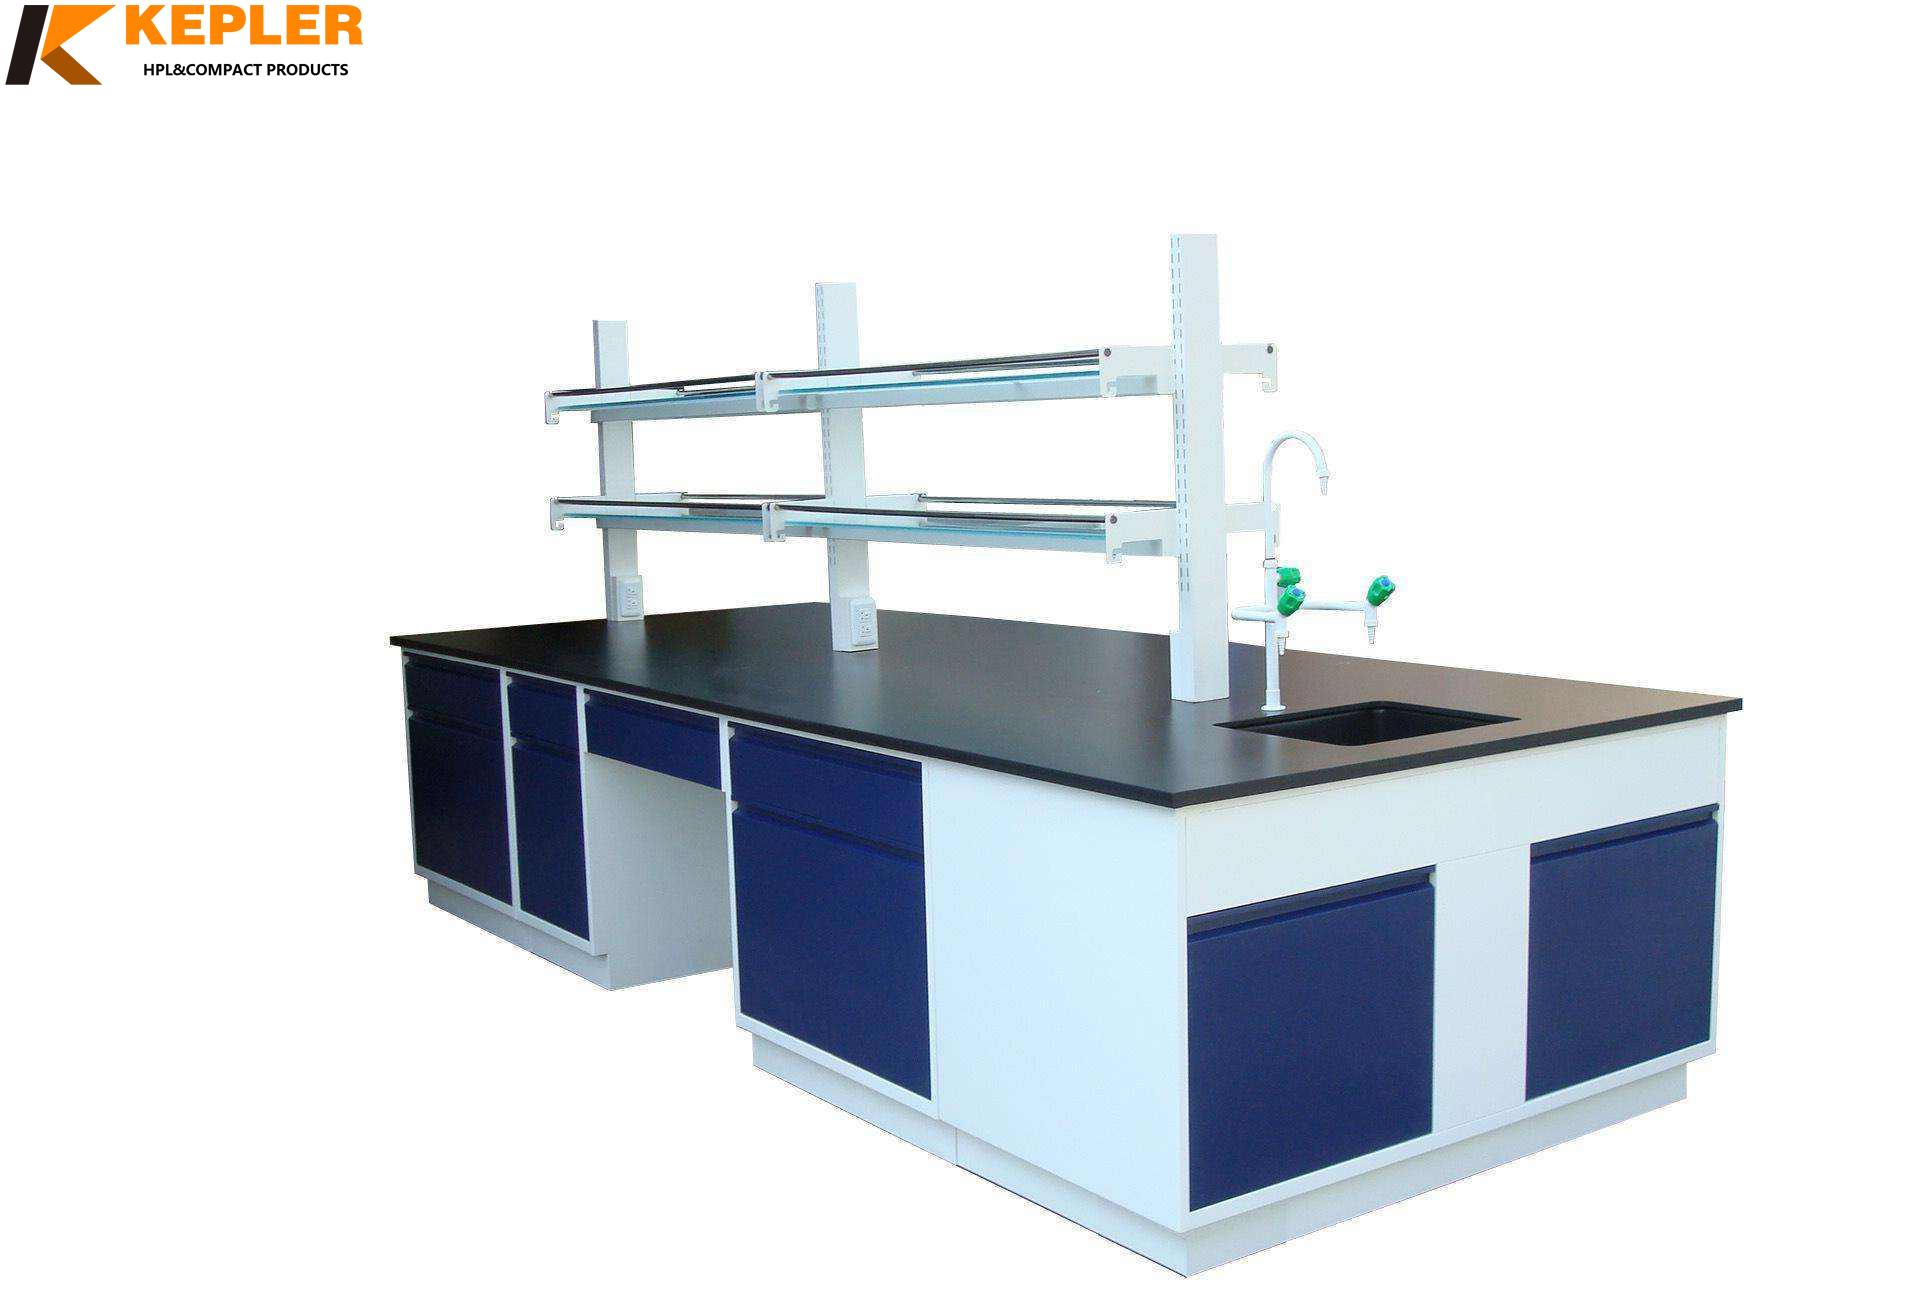 Kepler 12.7mm black core chemical and corrosion resistant phenolic compact hpl lamniate work table tops and bench panel